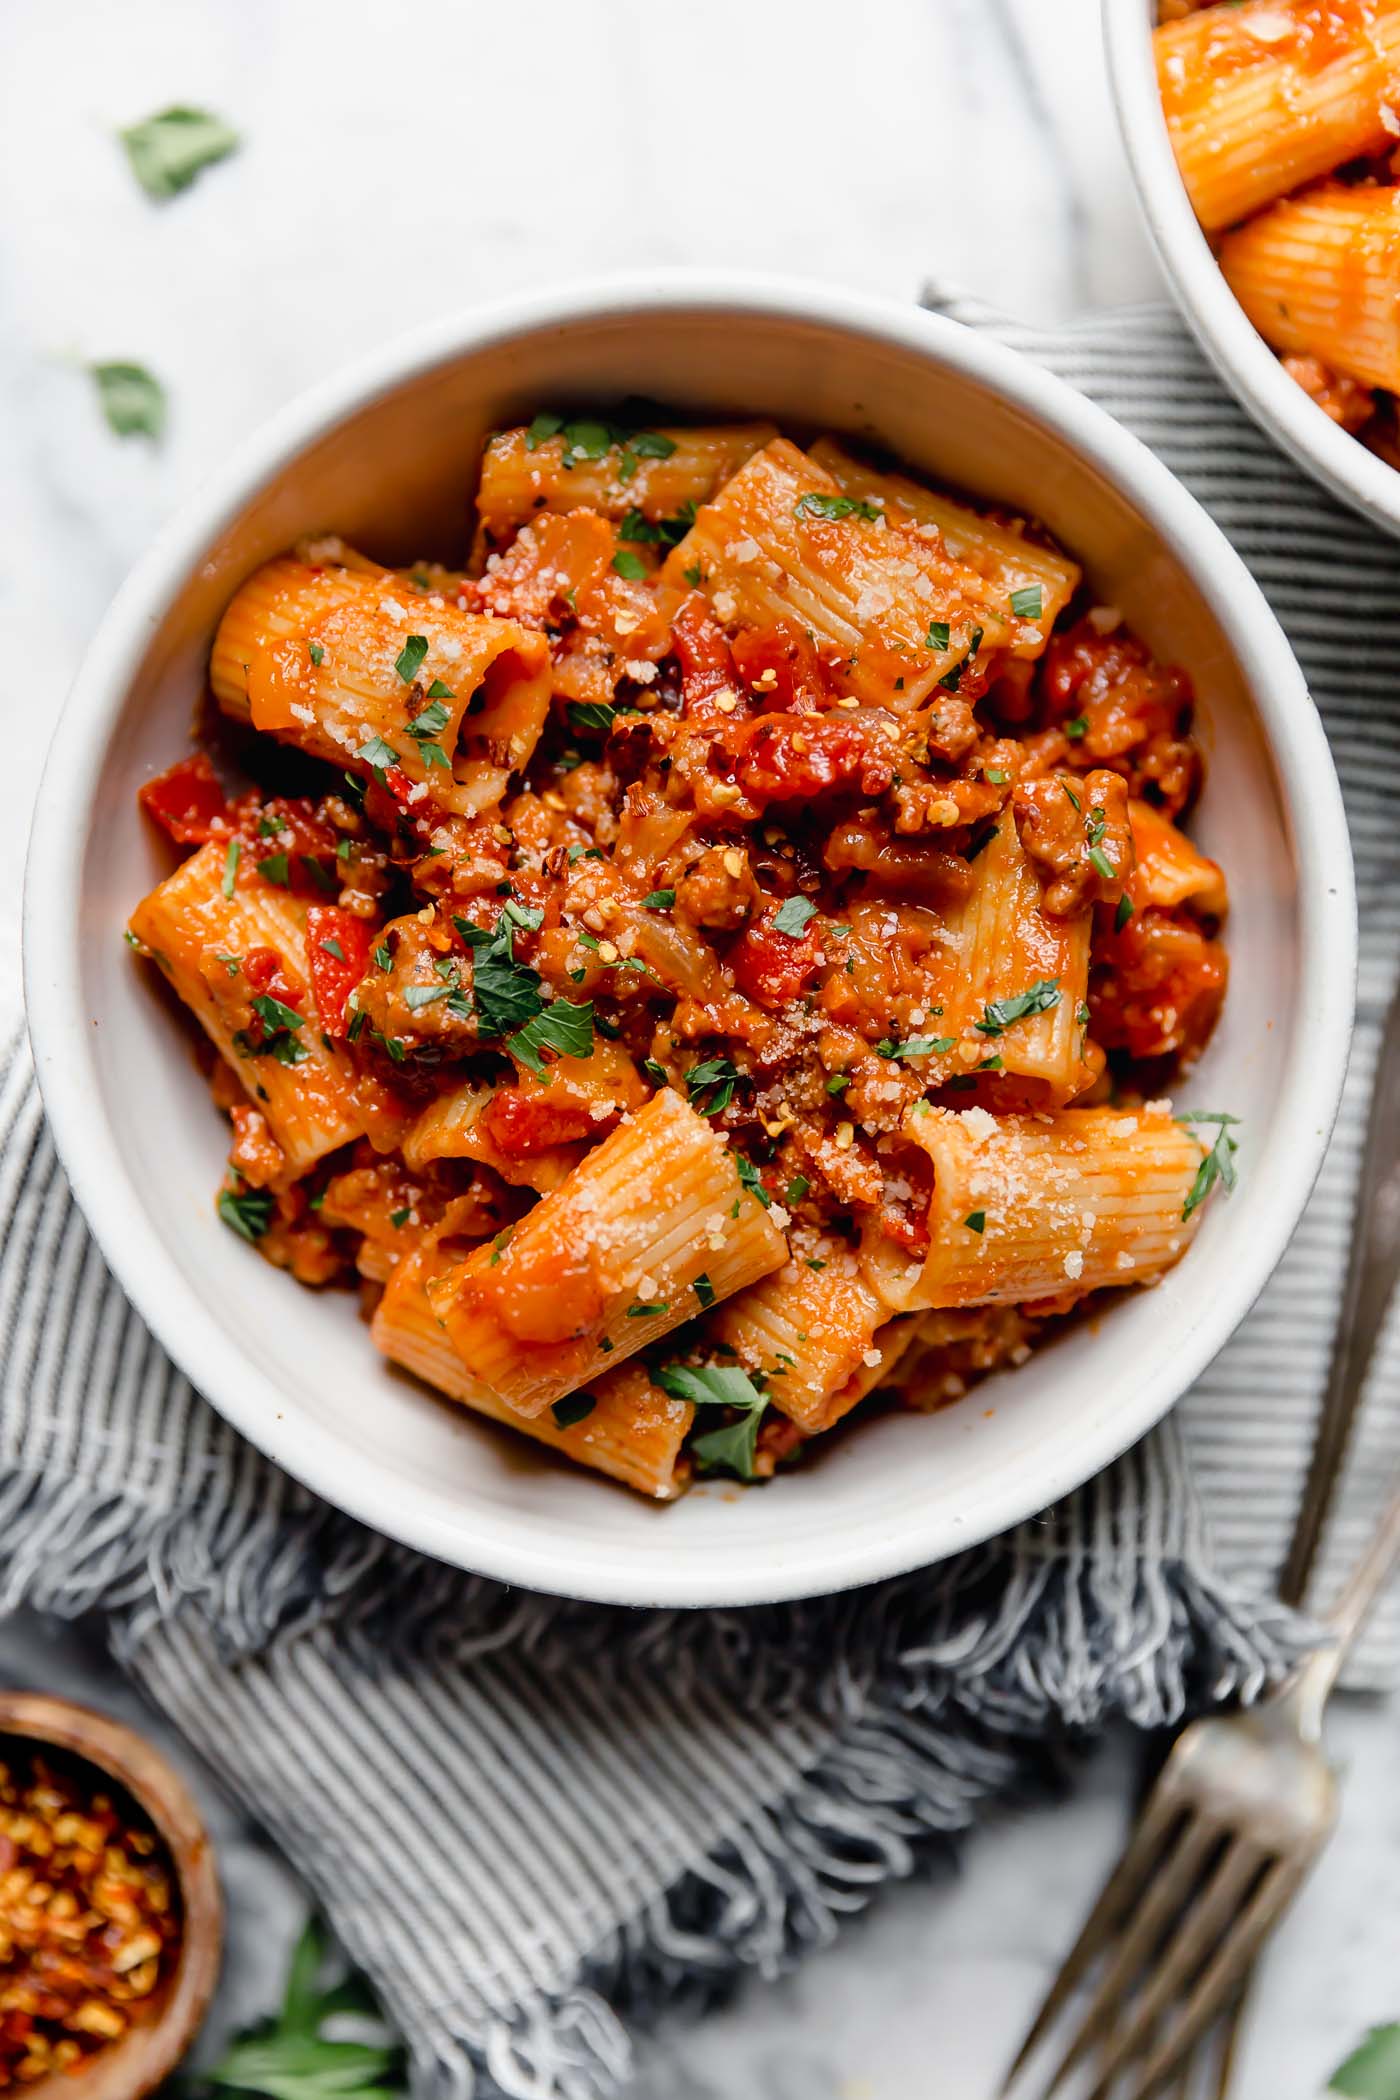 https://playswellwithbutter.com/wp-content/uploads/2019/10/Spicy-Italian-Sausage-Peppers-Pasta-13.jpg